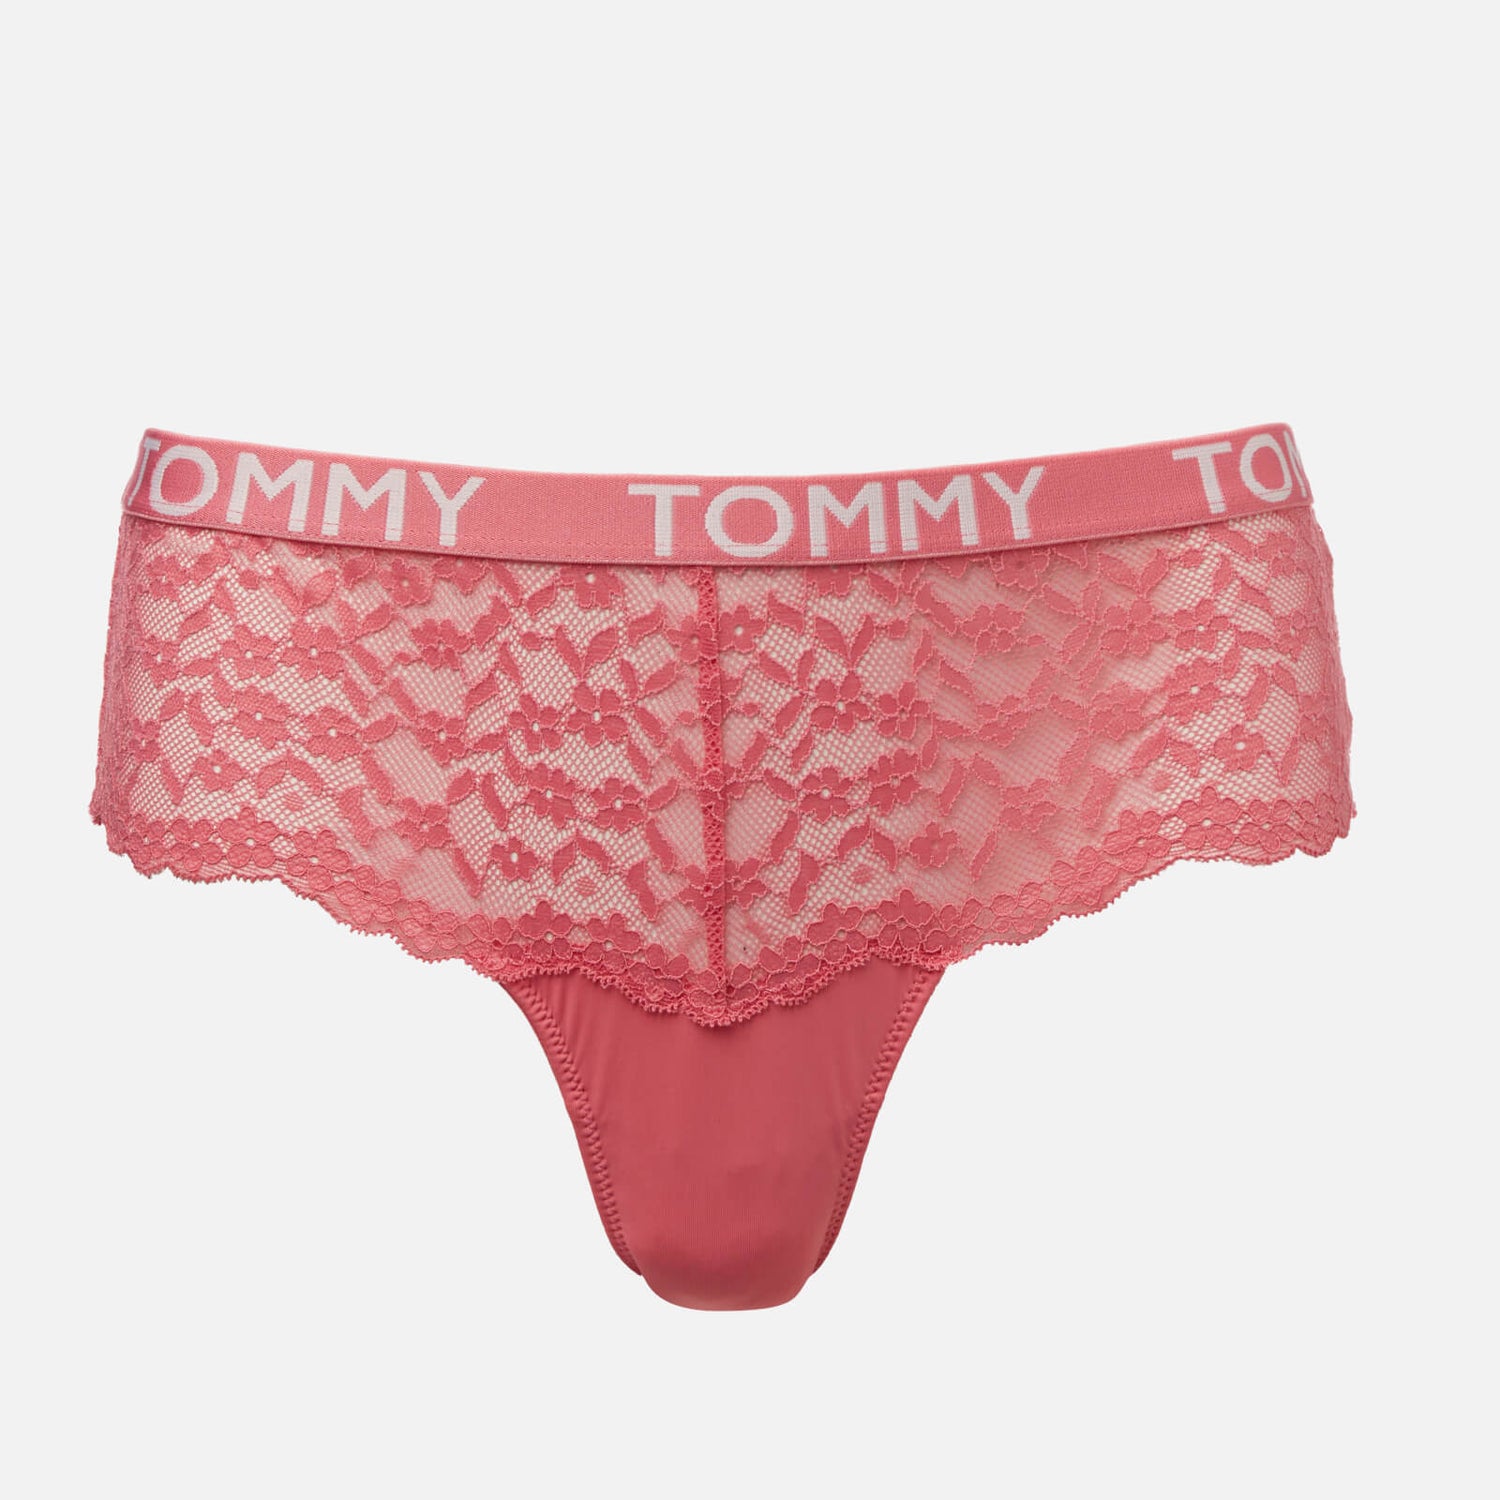 Tommy Hilfiger Women's Lace Hipster Brief - Hamptons Pink -